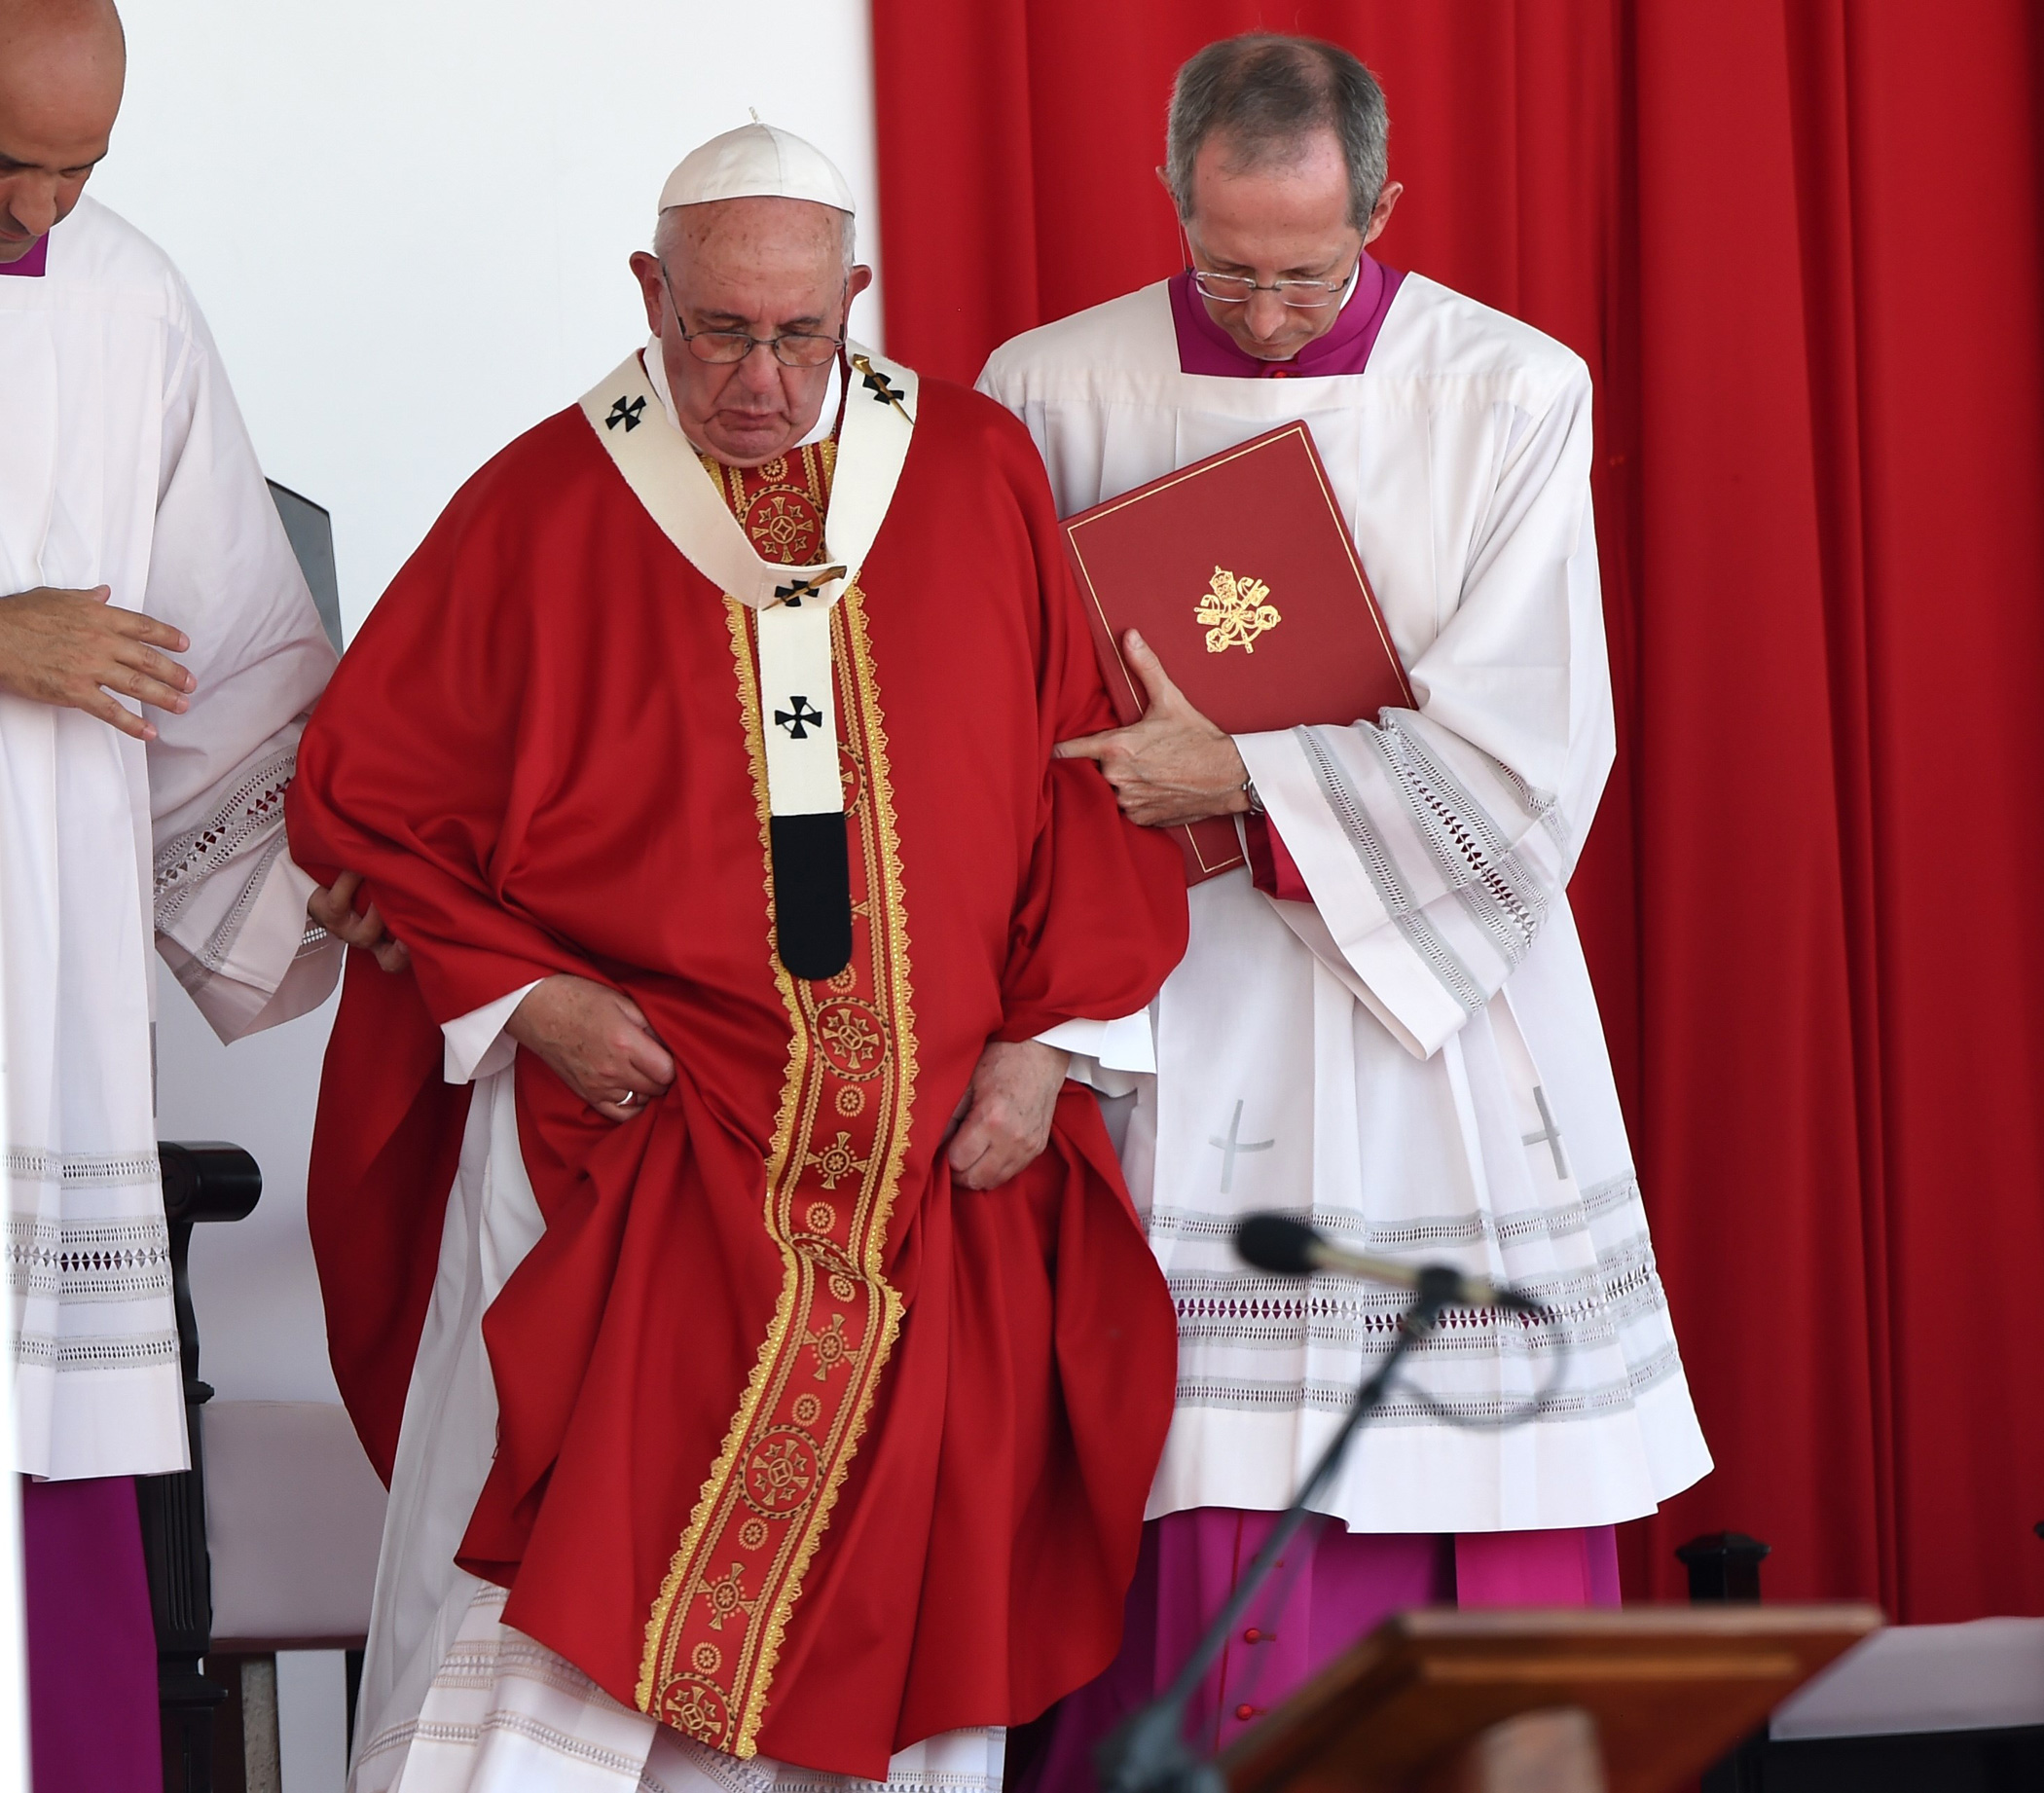 Pope Francis U.S. Visit Meaning Behind the Pope's Clothes Time